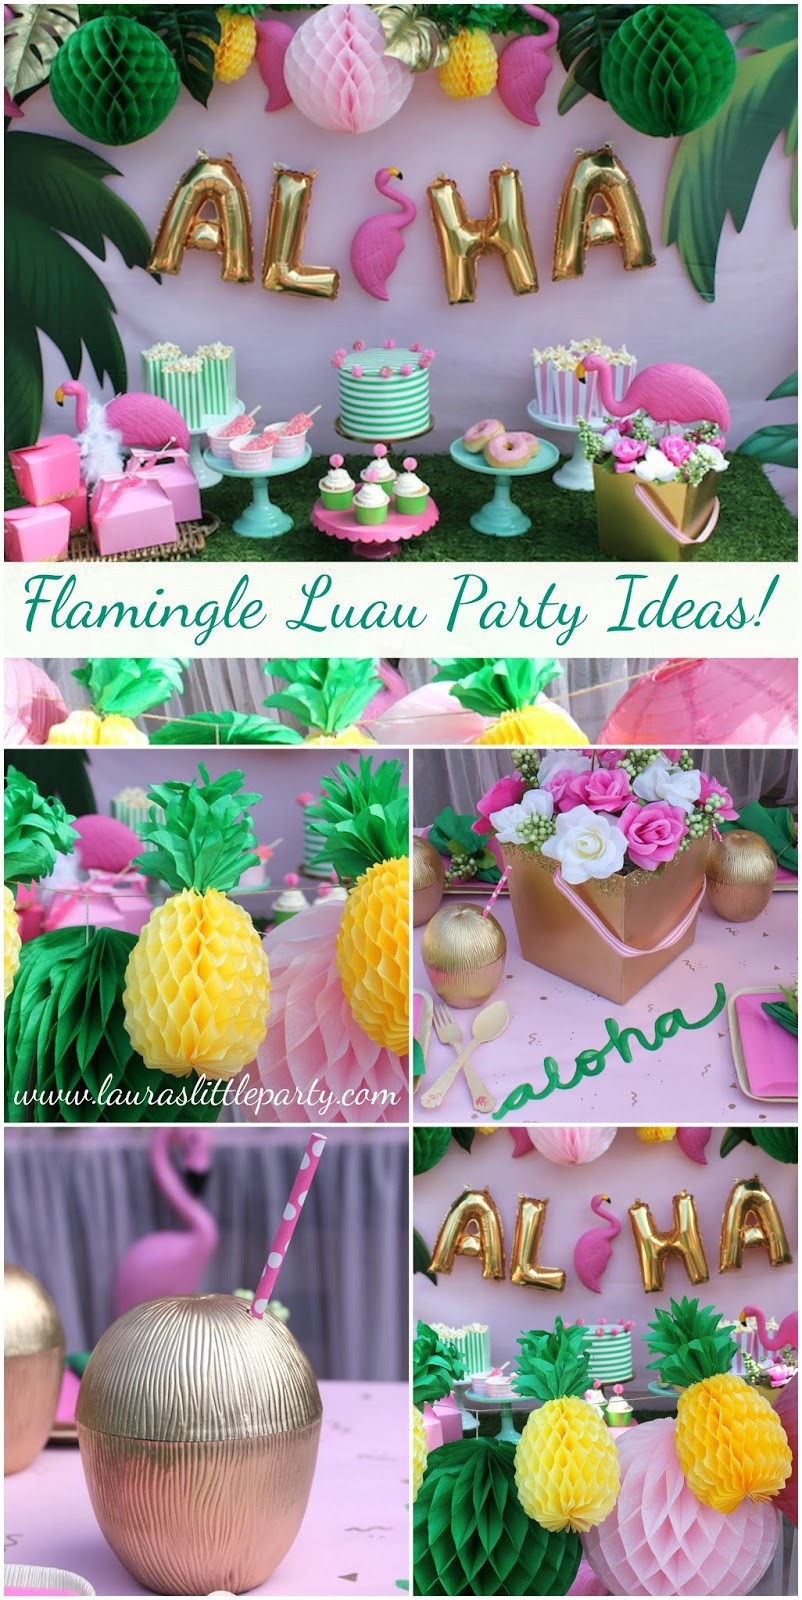 Summer Birthday Party Ideas For Teens
 Let s Flamingle Luau Summer Party Ideas LAURA S little